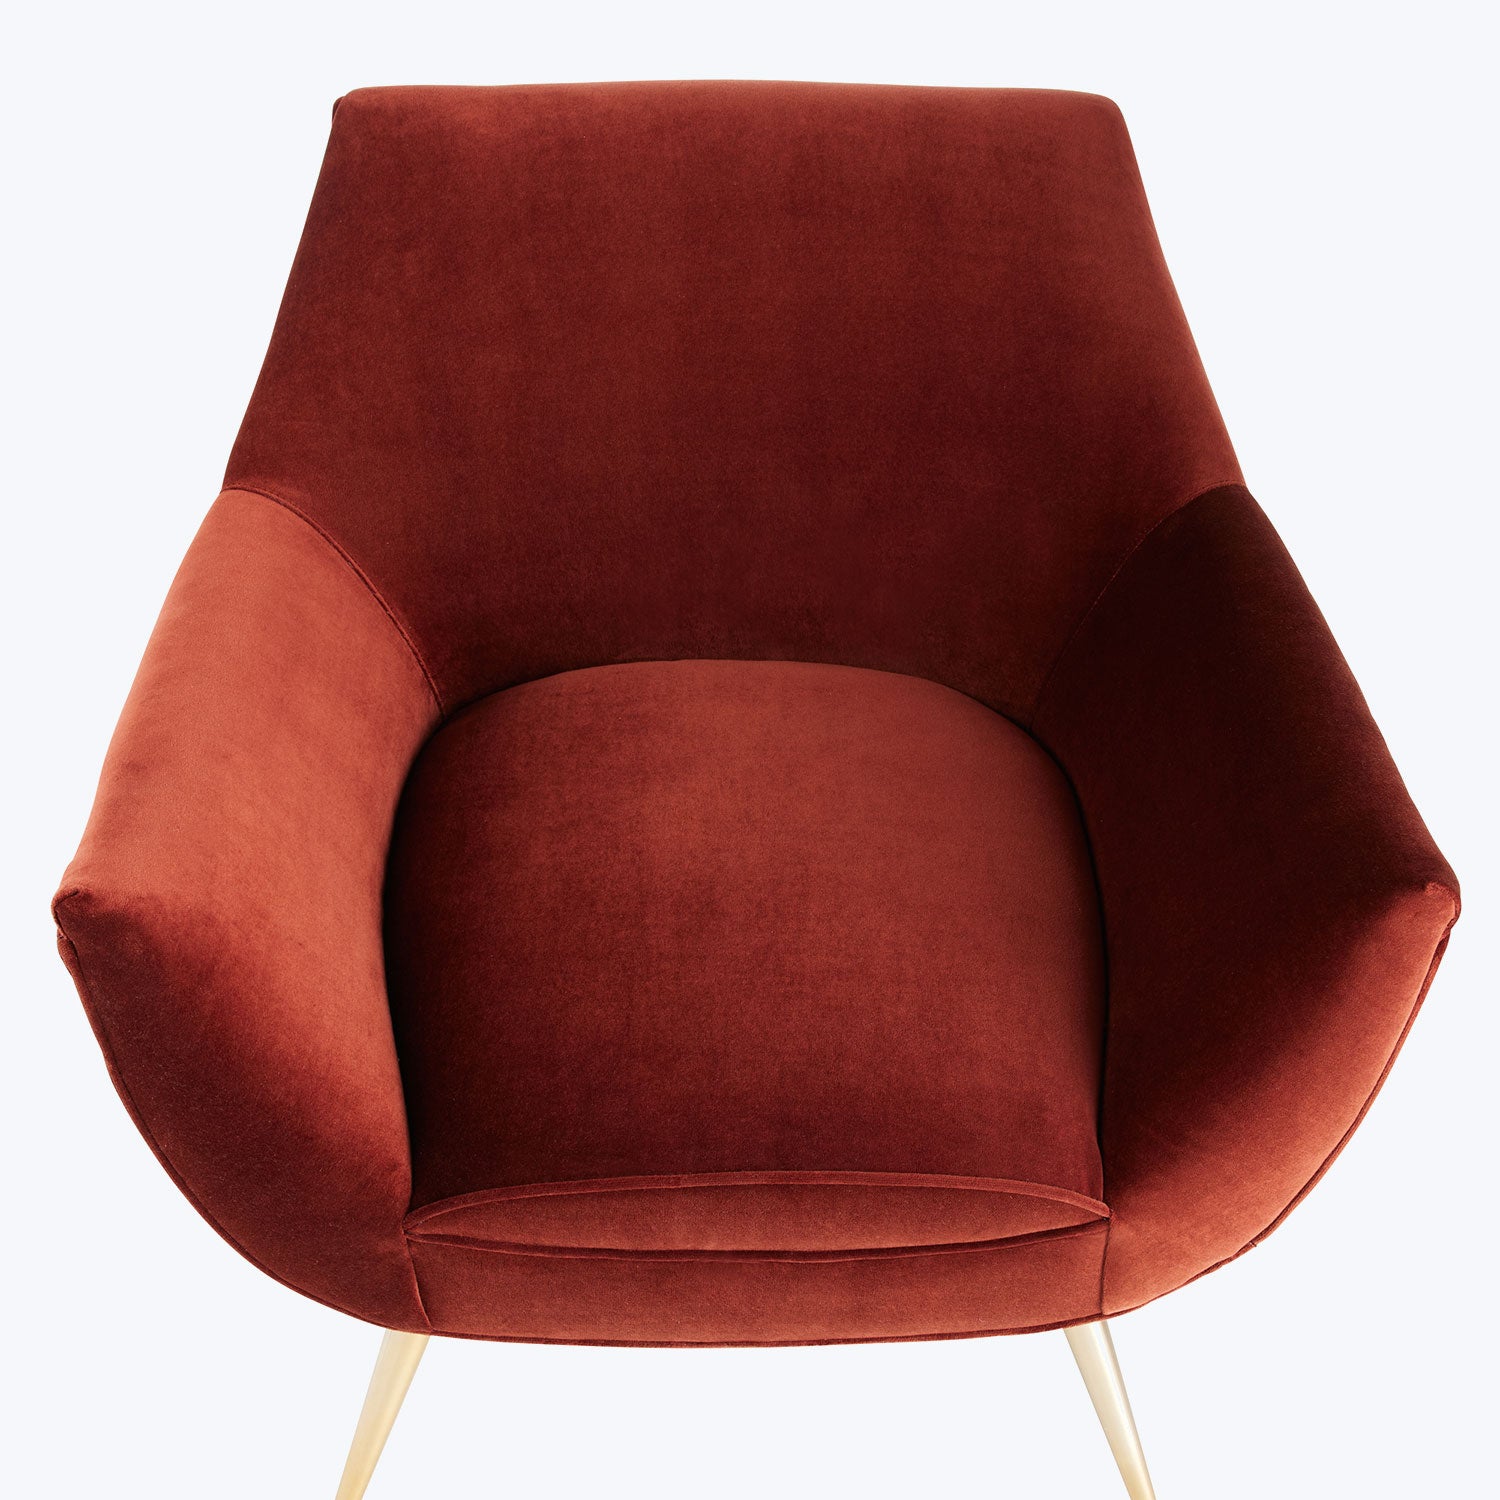 Modern armchair with elegant design and luxurious terracotta upholstery.